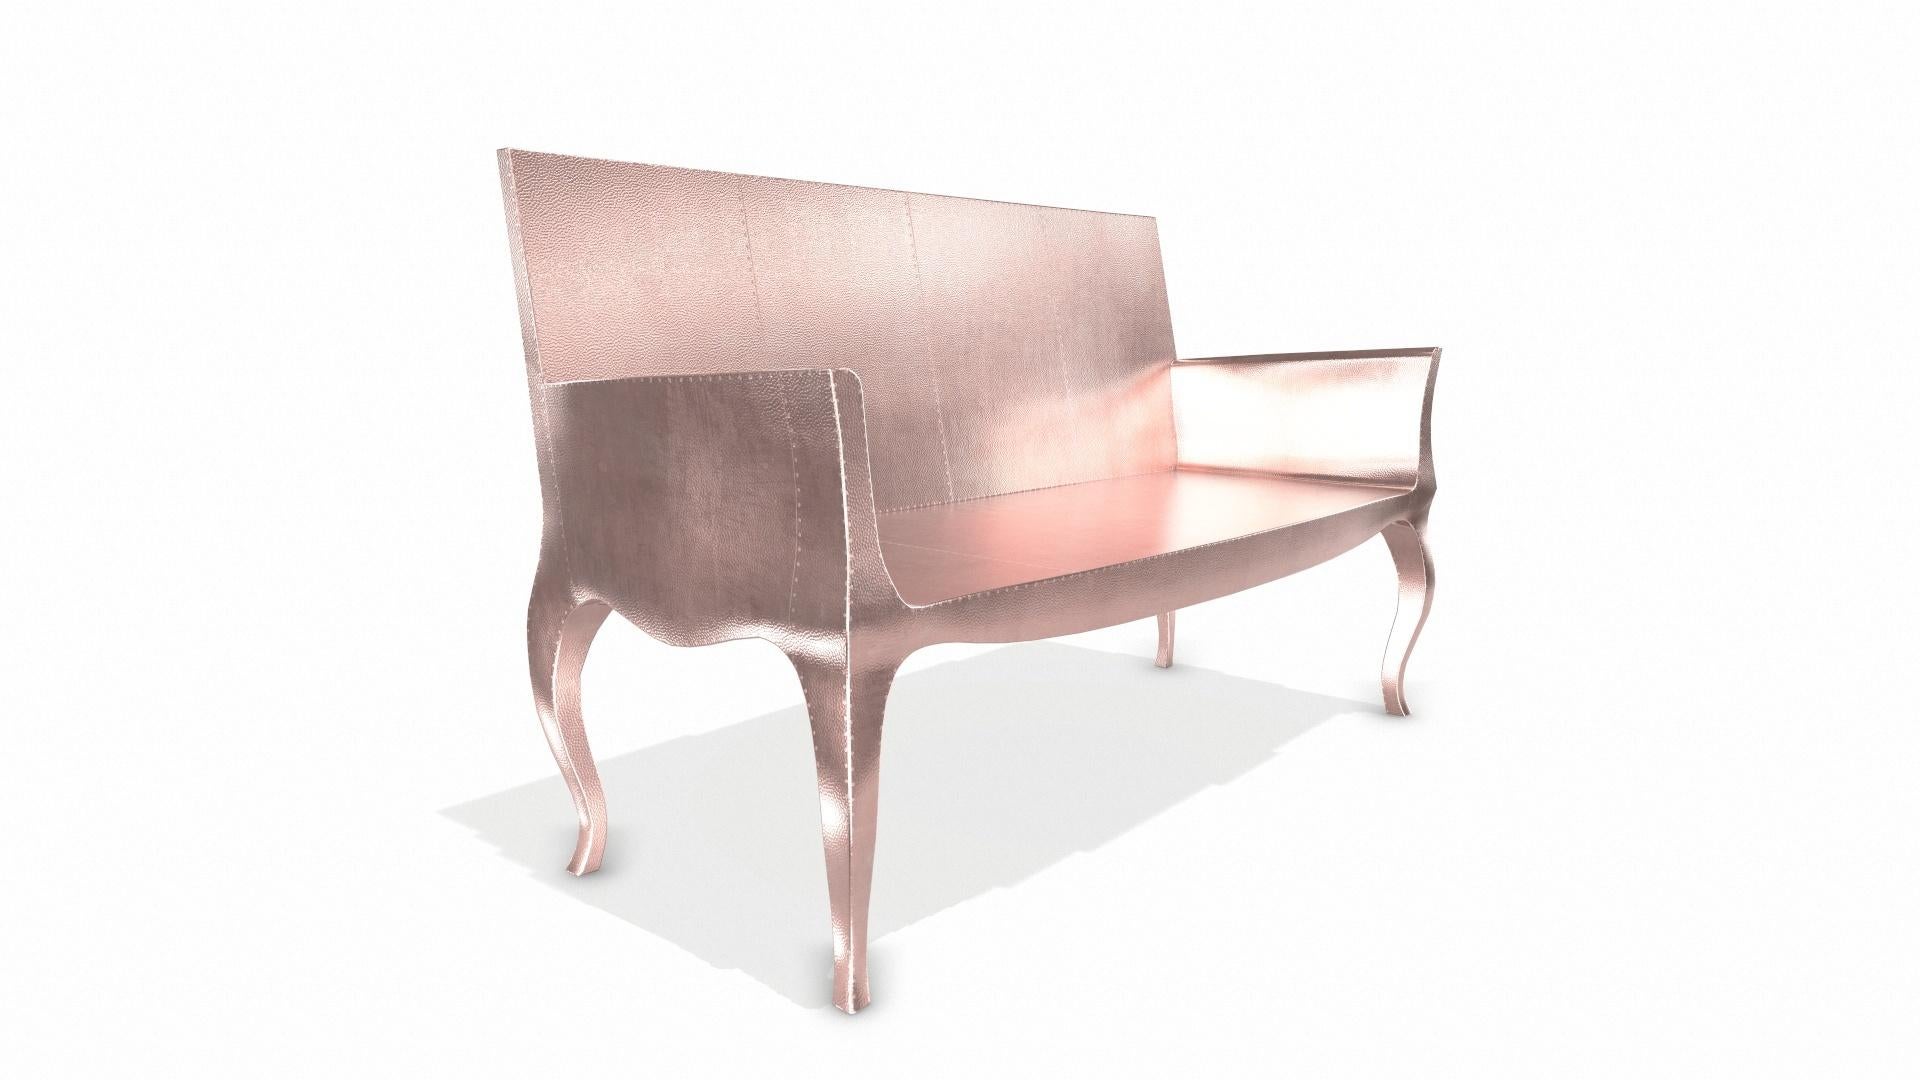 Louise Settee Art Deco Benches in Mid. Hammered Copper by Paul Mathieu In New Condition For Sale In New York, NY